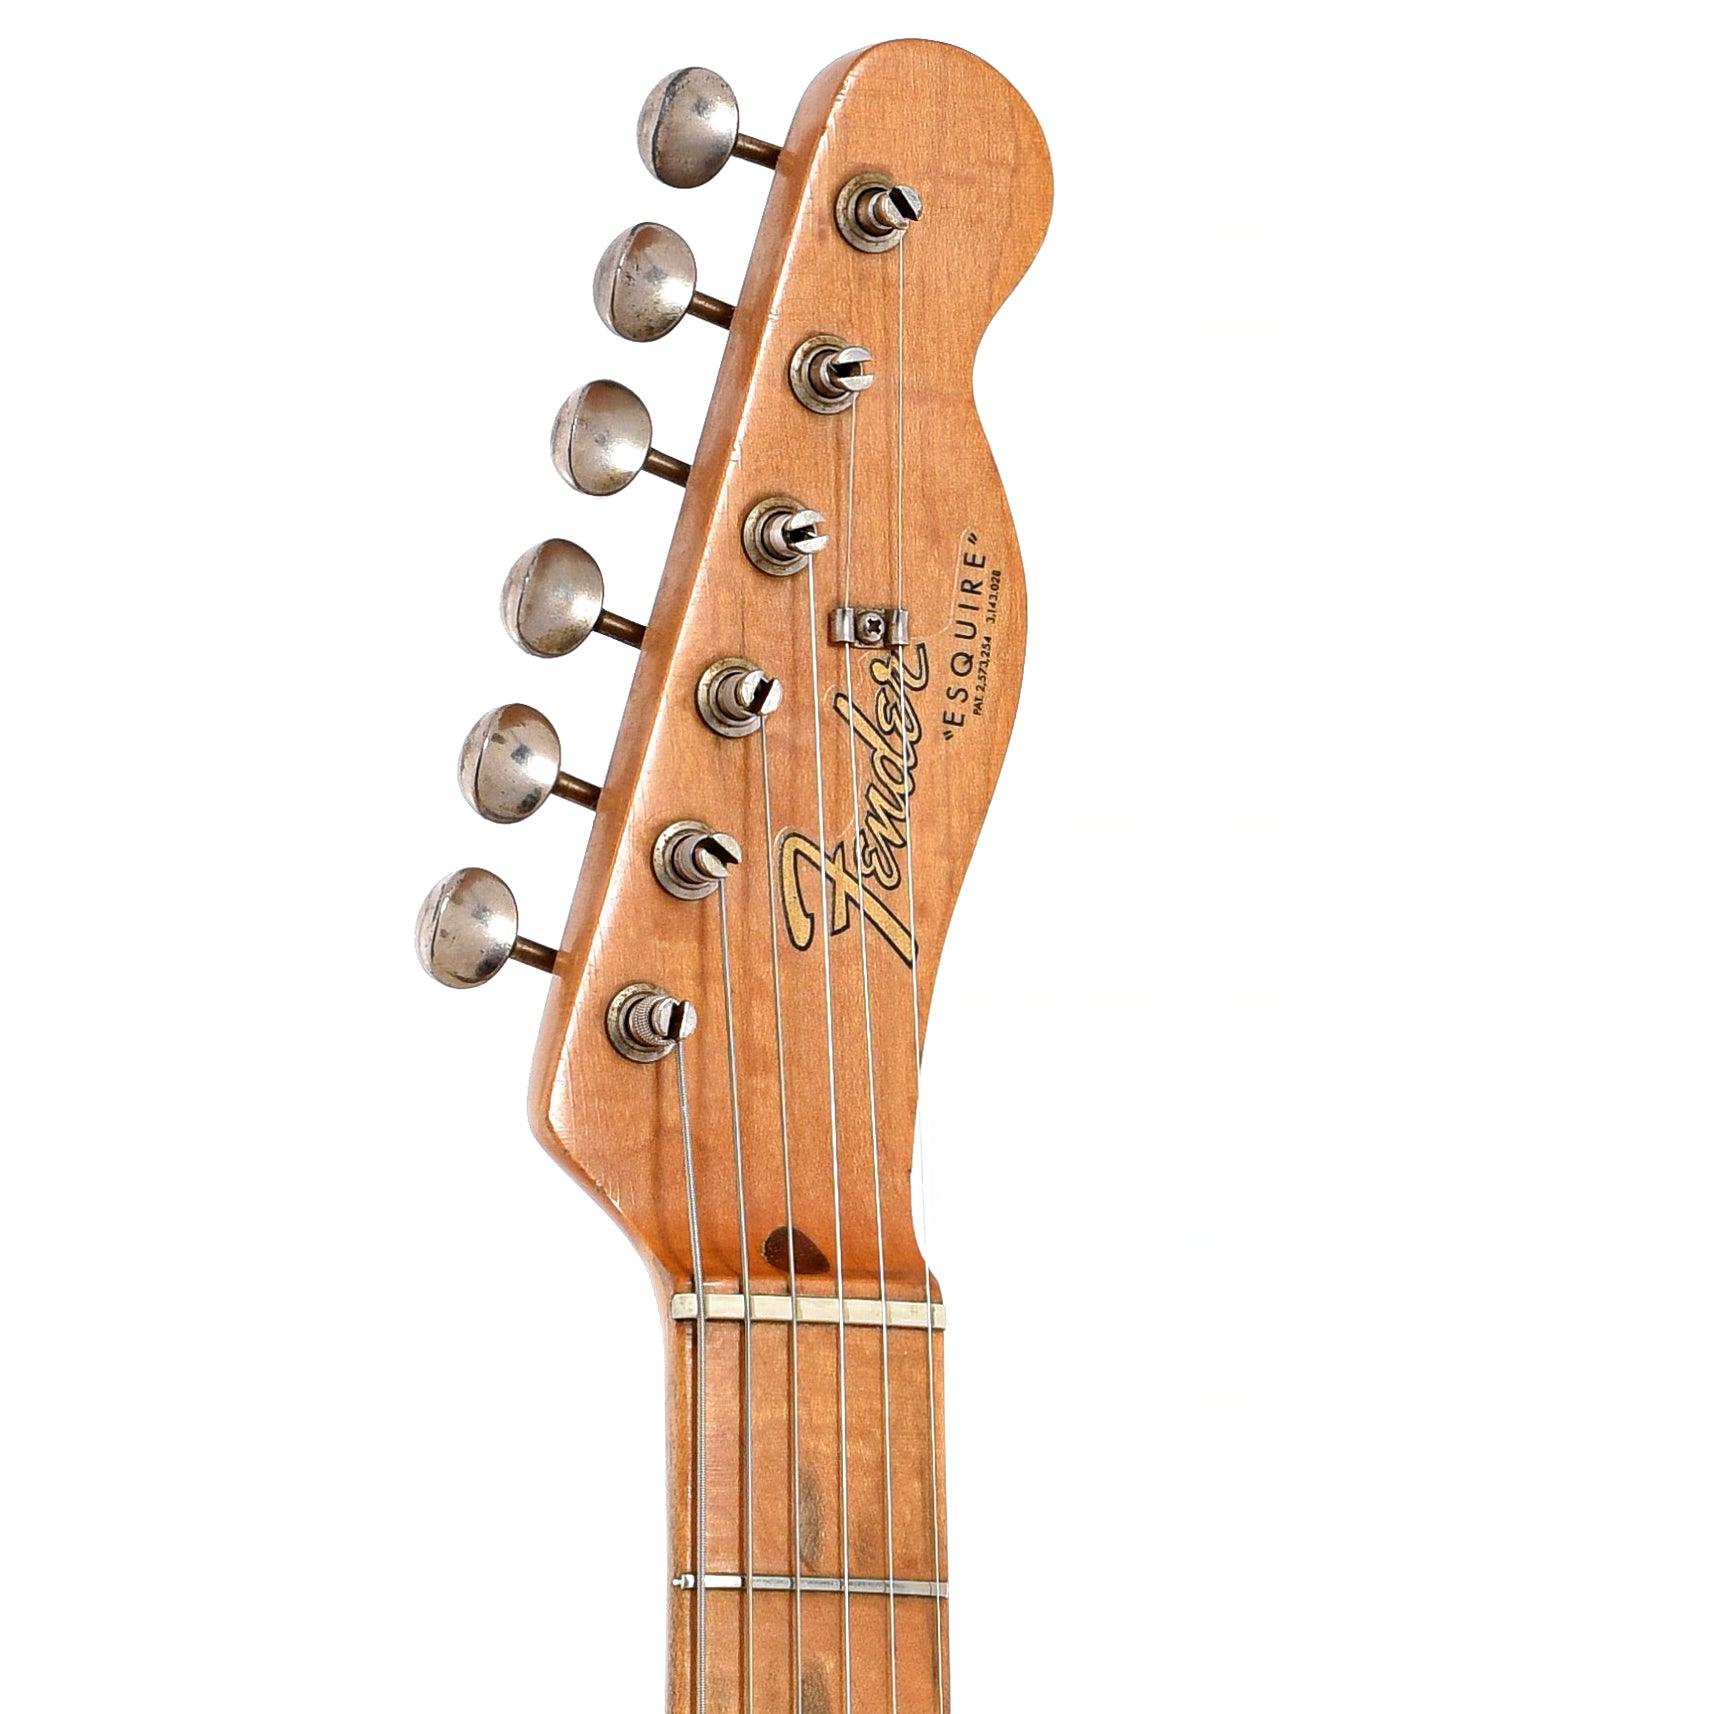 Front headstock of Fender Esquire Electric Guitar (1954)